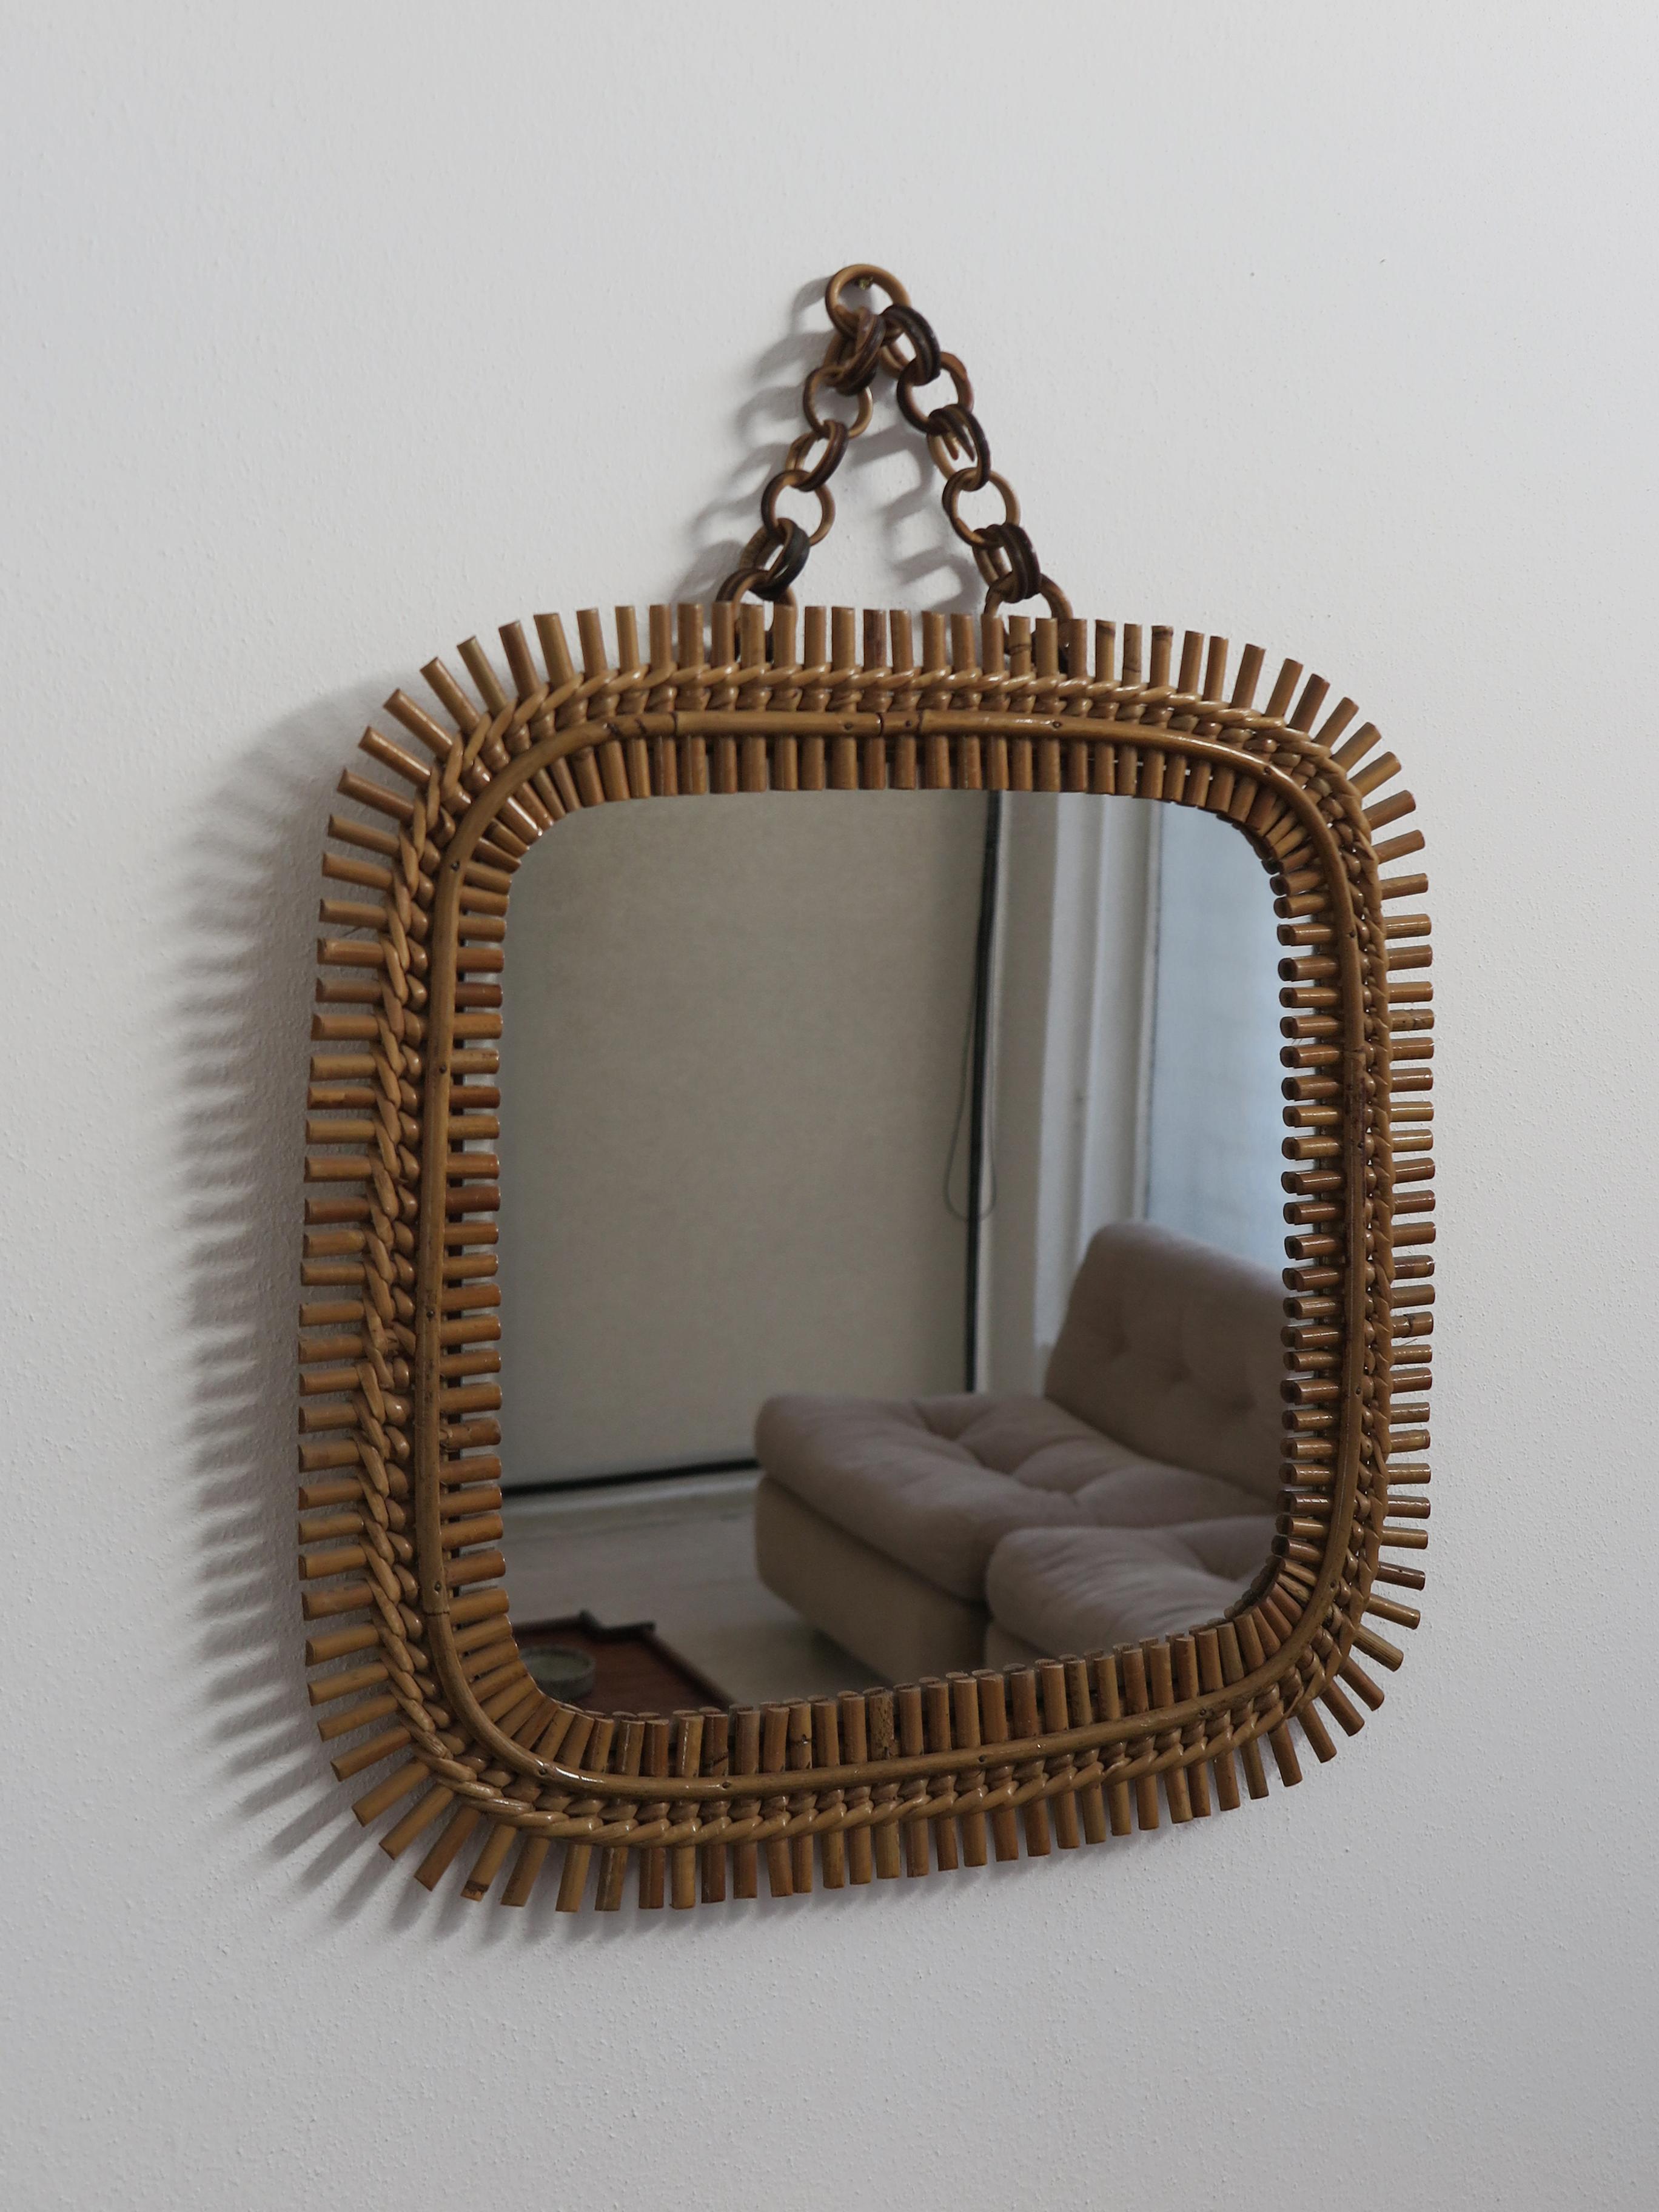 Italian Mid-Century Modern design bamboo rattan wall mirror, Italy 1950s

Please note that the items is original of the period and this shows normal signs of age and use.